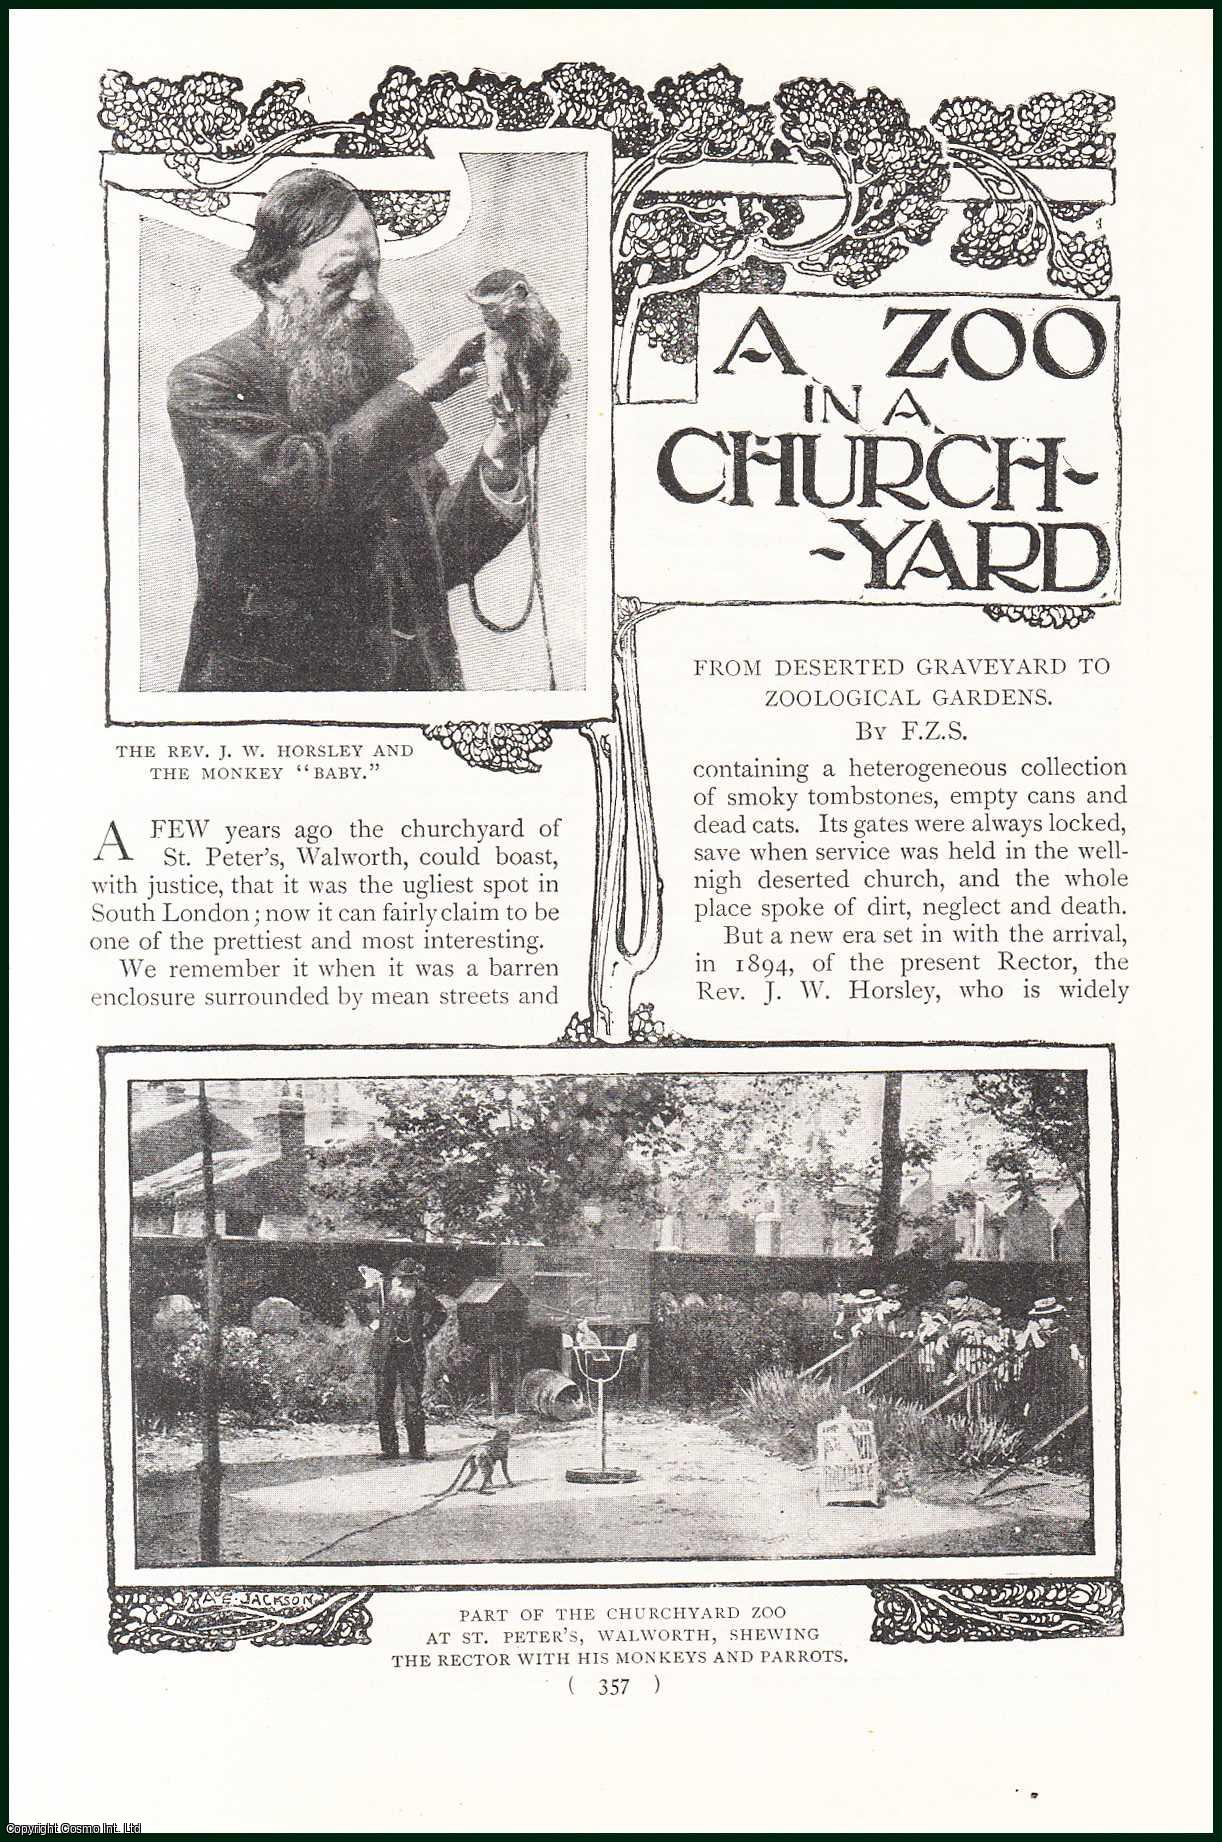 S., F. Z. - A Zoo in a Church-Yard. From Deserted Graveyard to Zoological Gardens. A rare original article from the Harmsworth London Magazine, 1901.